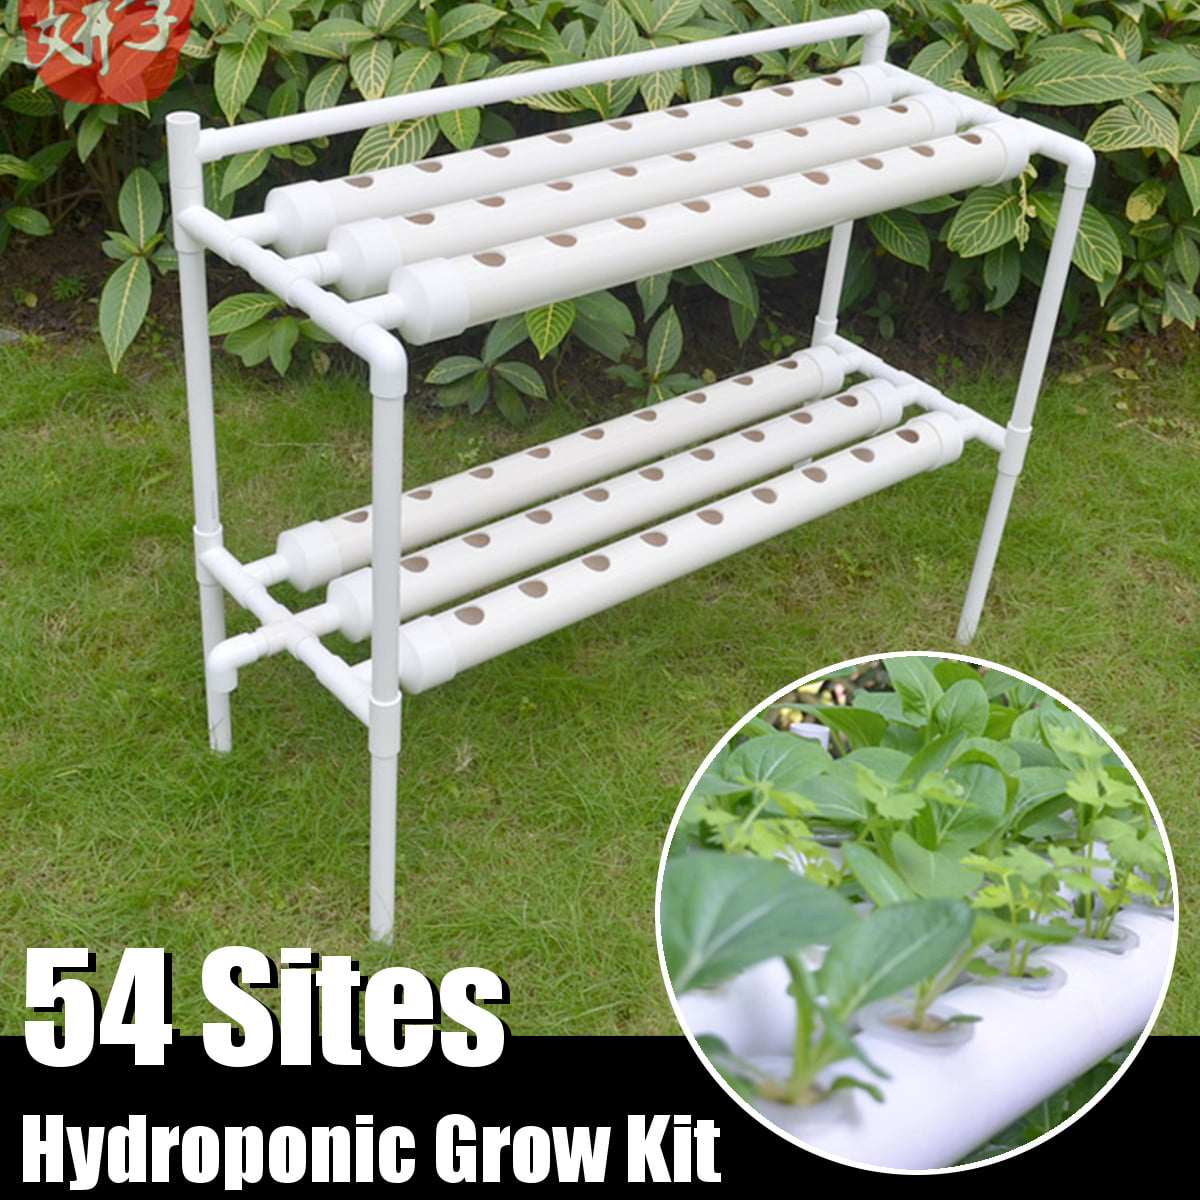 1 PC Hydroponic 54 Plant Site Grow Kit Ebb Water Culture Garden System 6 Pipes 